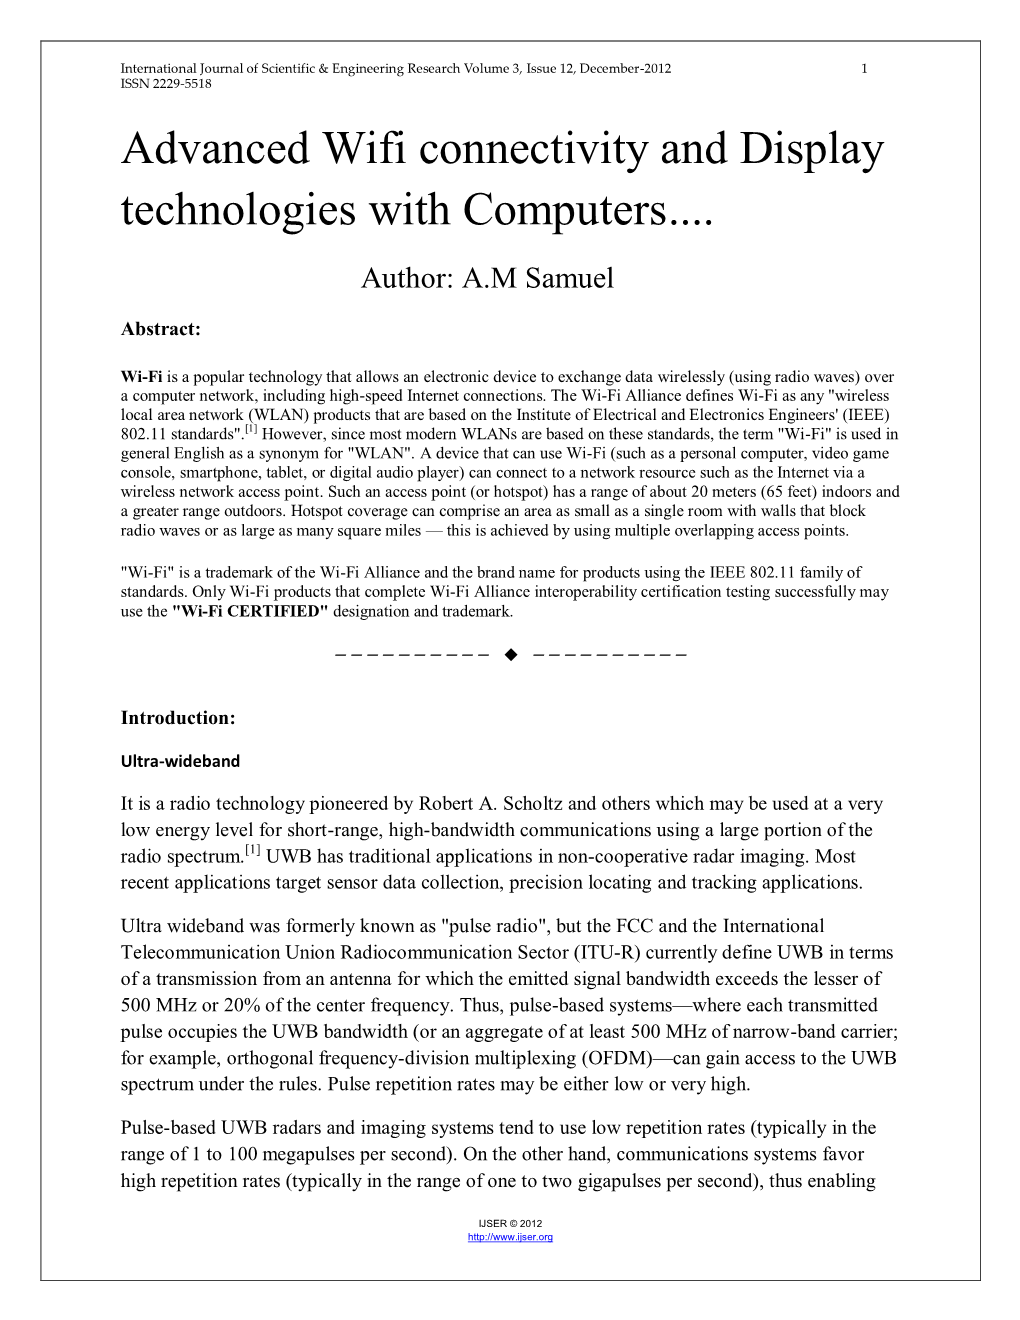 Advanced Wifi Connectivity and Display Technologies with Computers